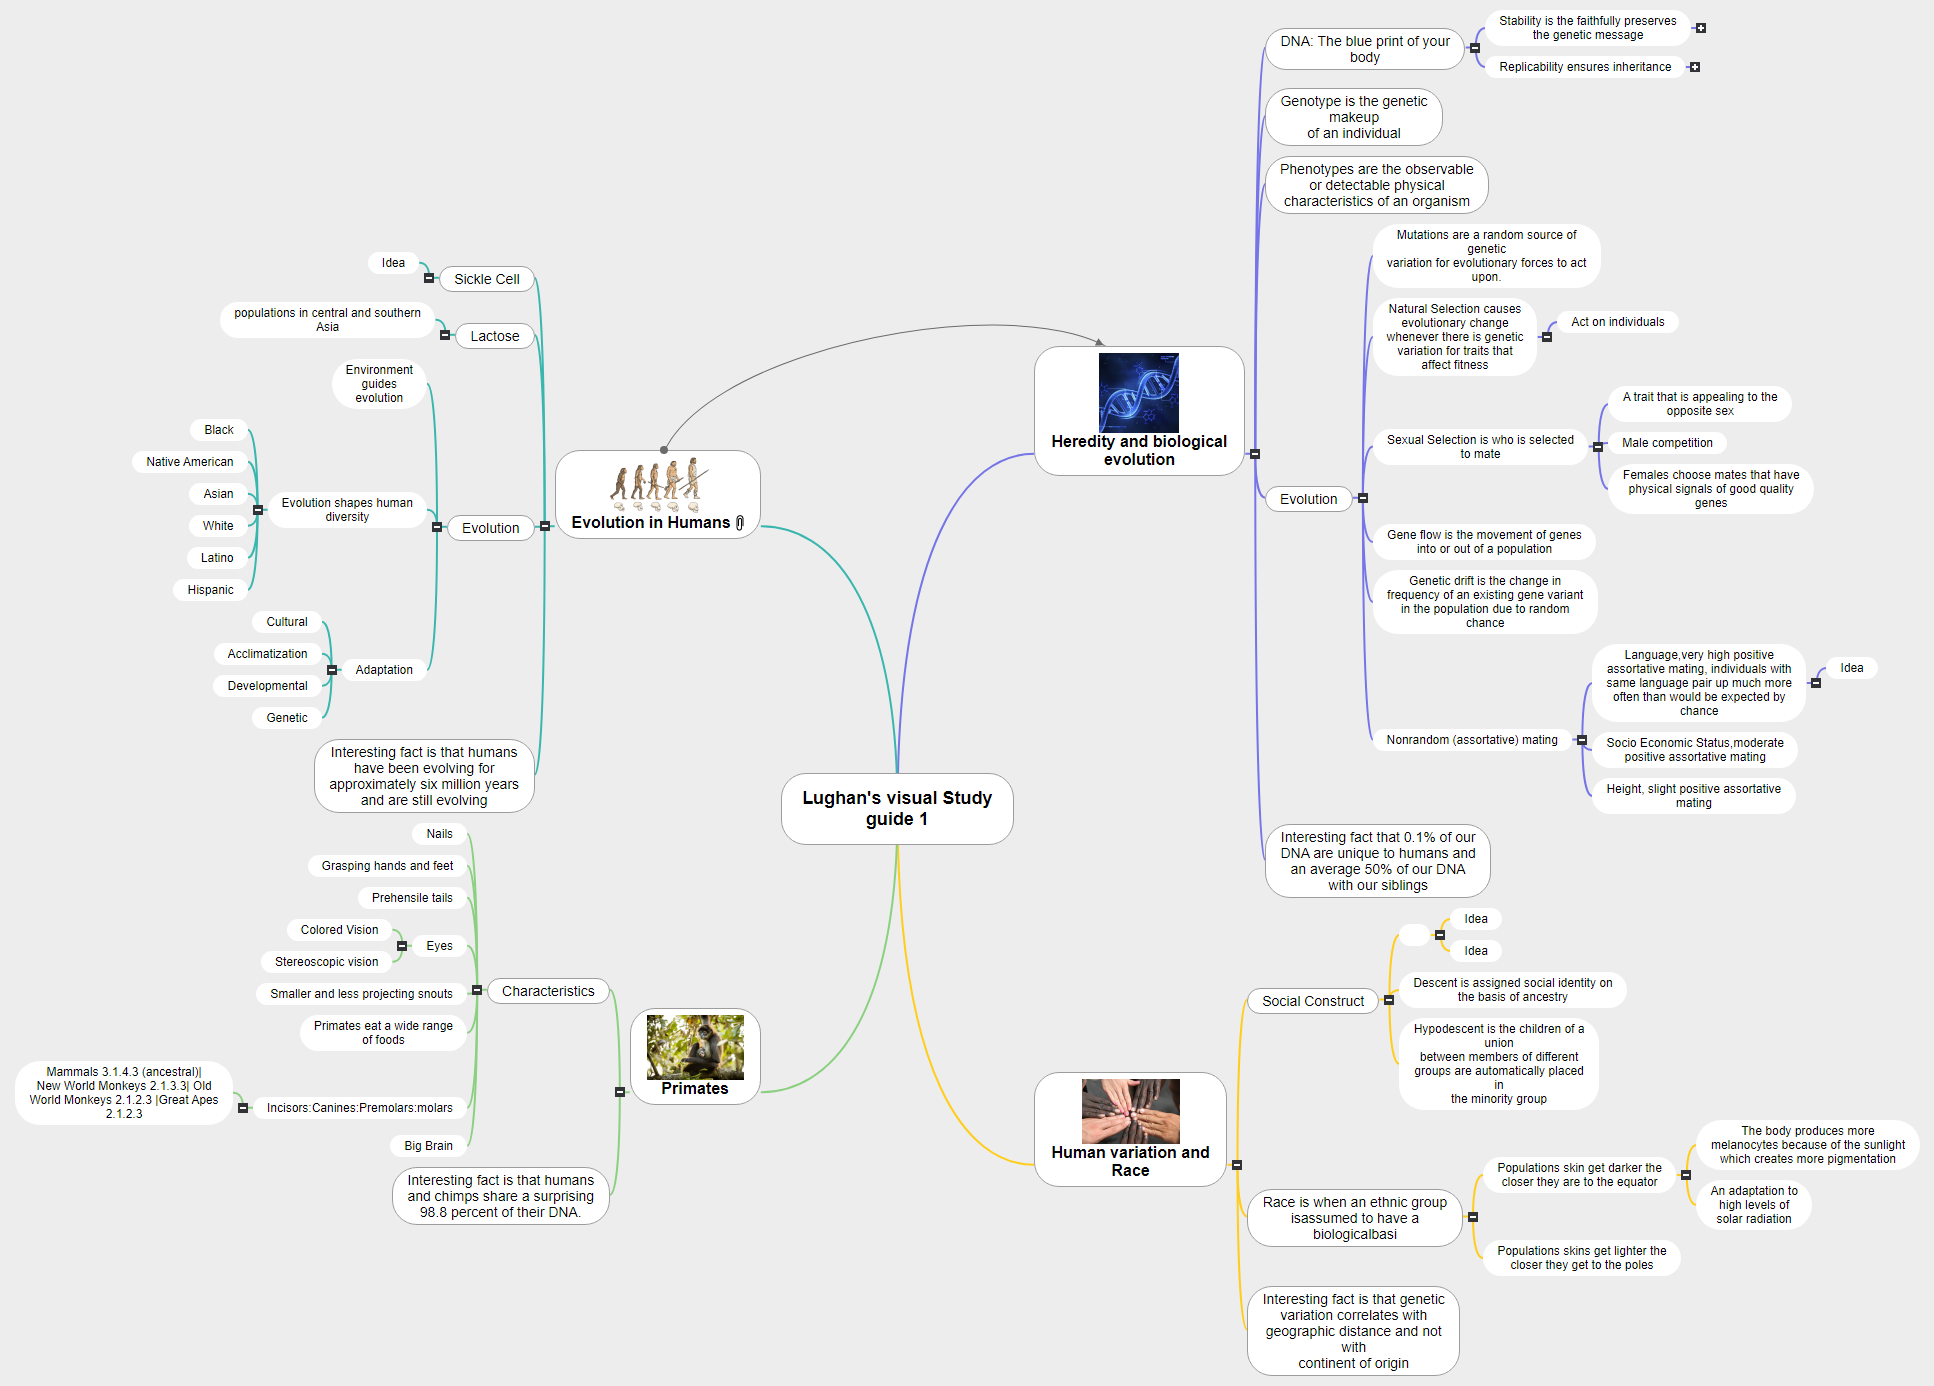 Lughan's visual Study guide 1 Mind Map